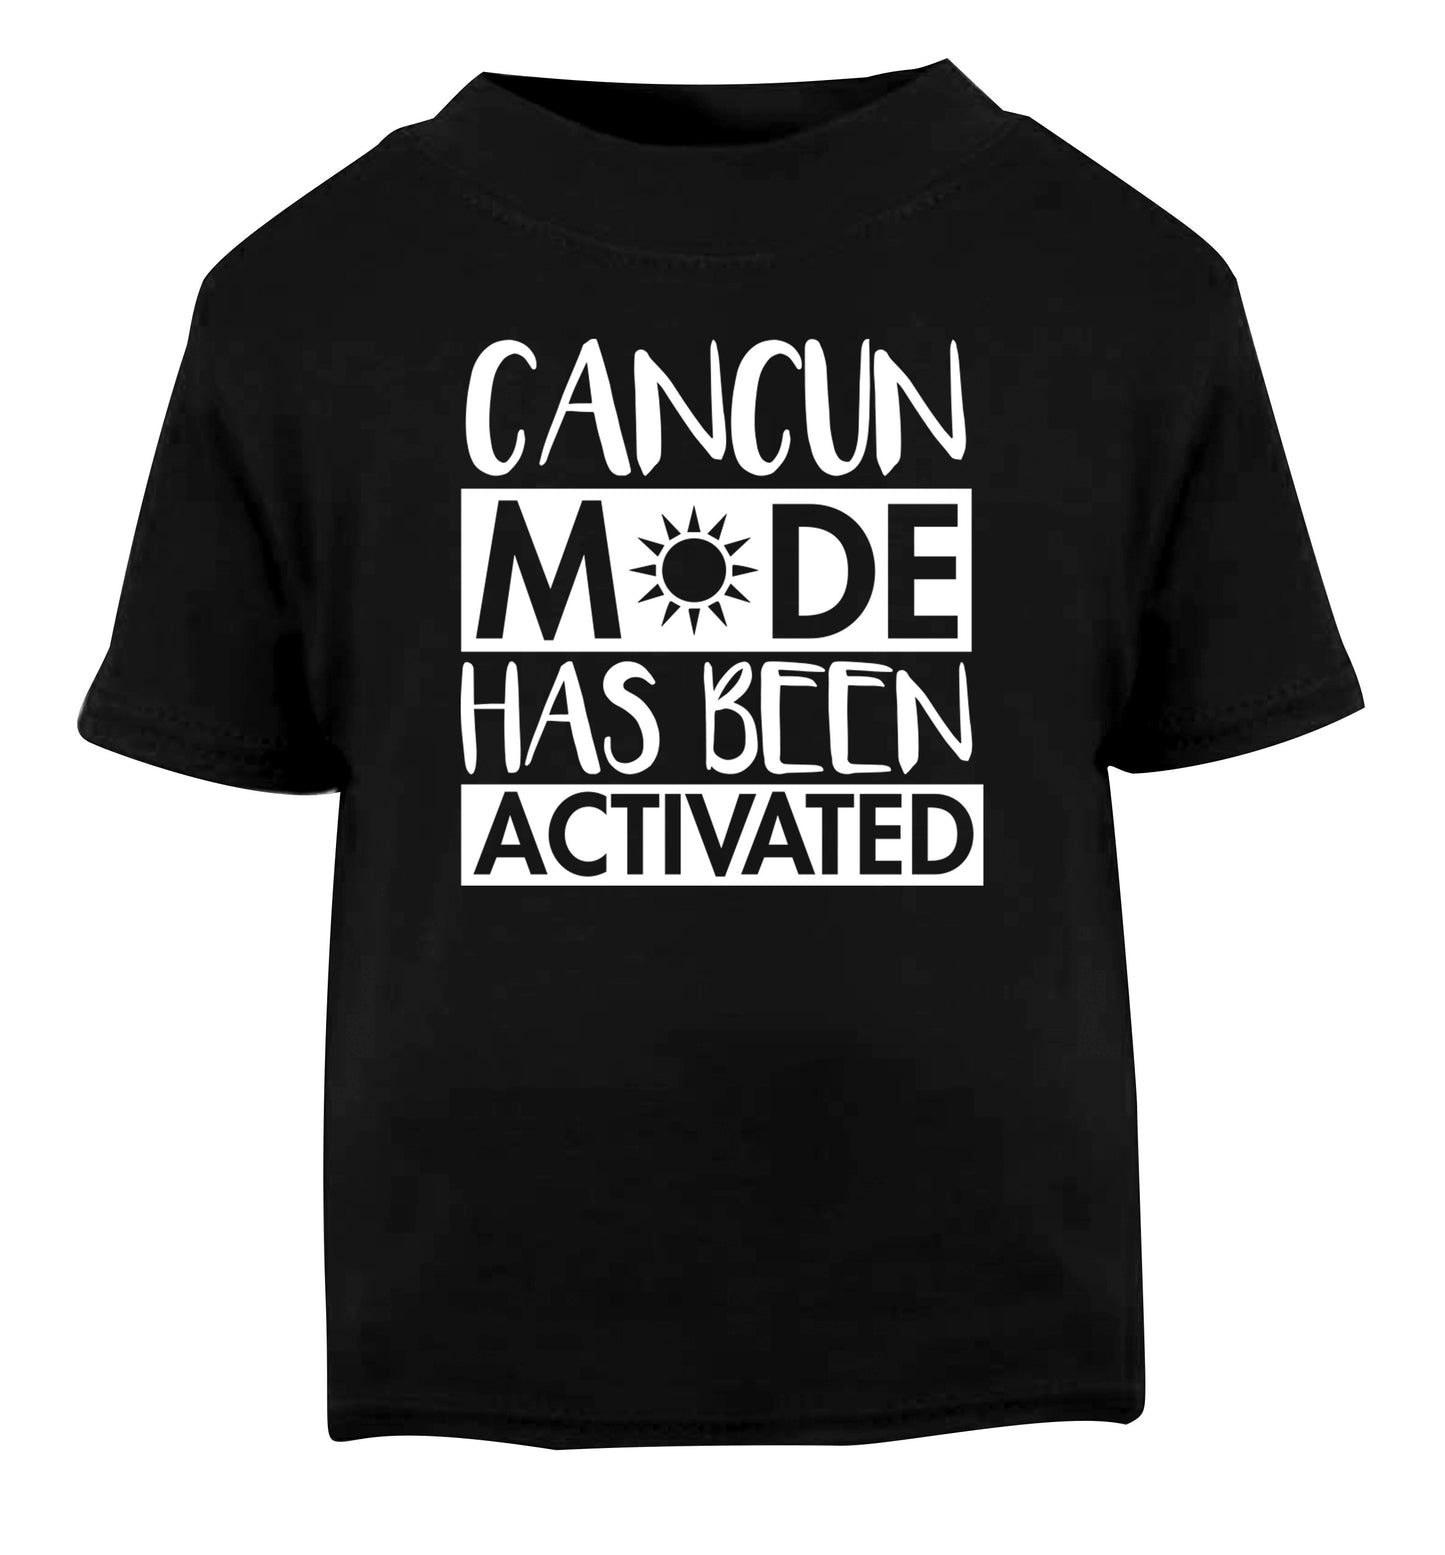 Cancun mode has been activated Black Baby Toddler Tshirt 2 years